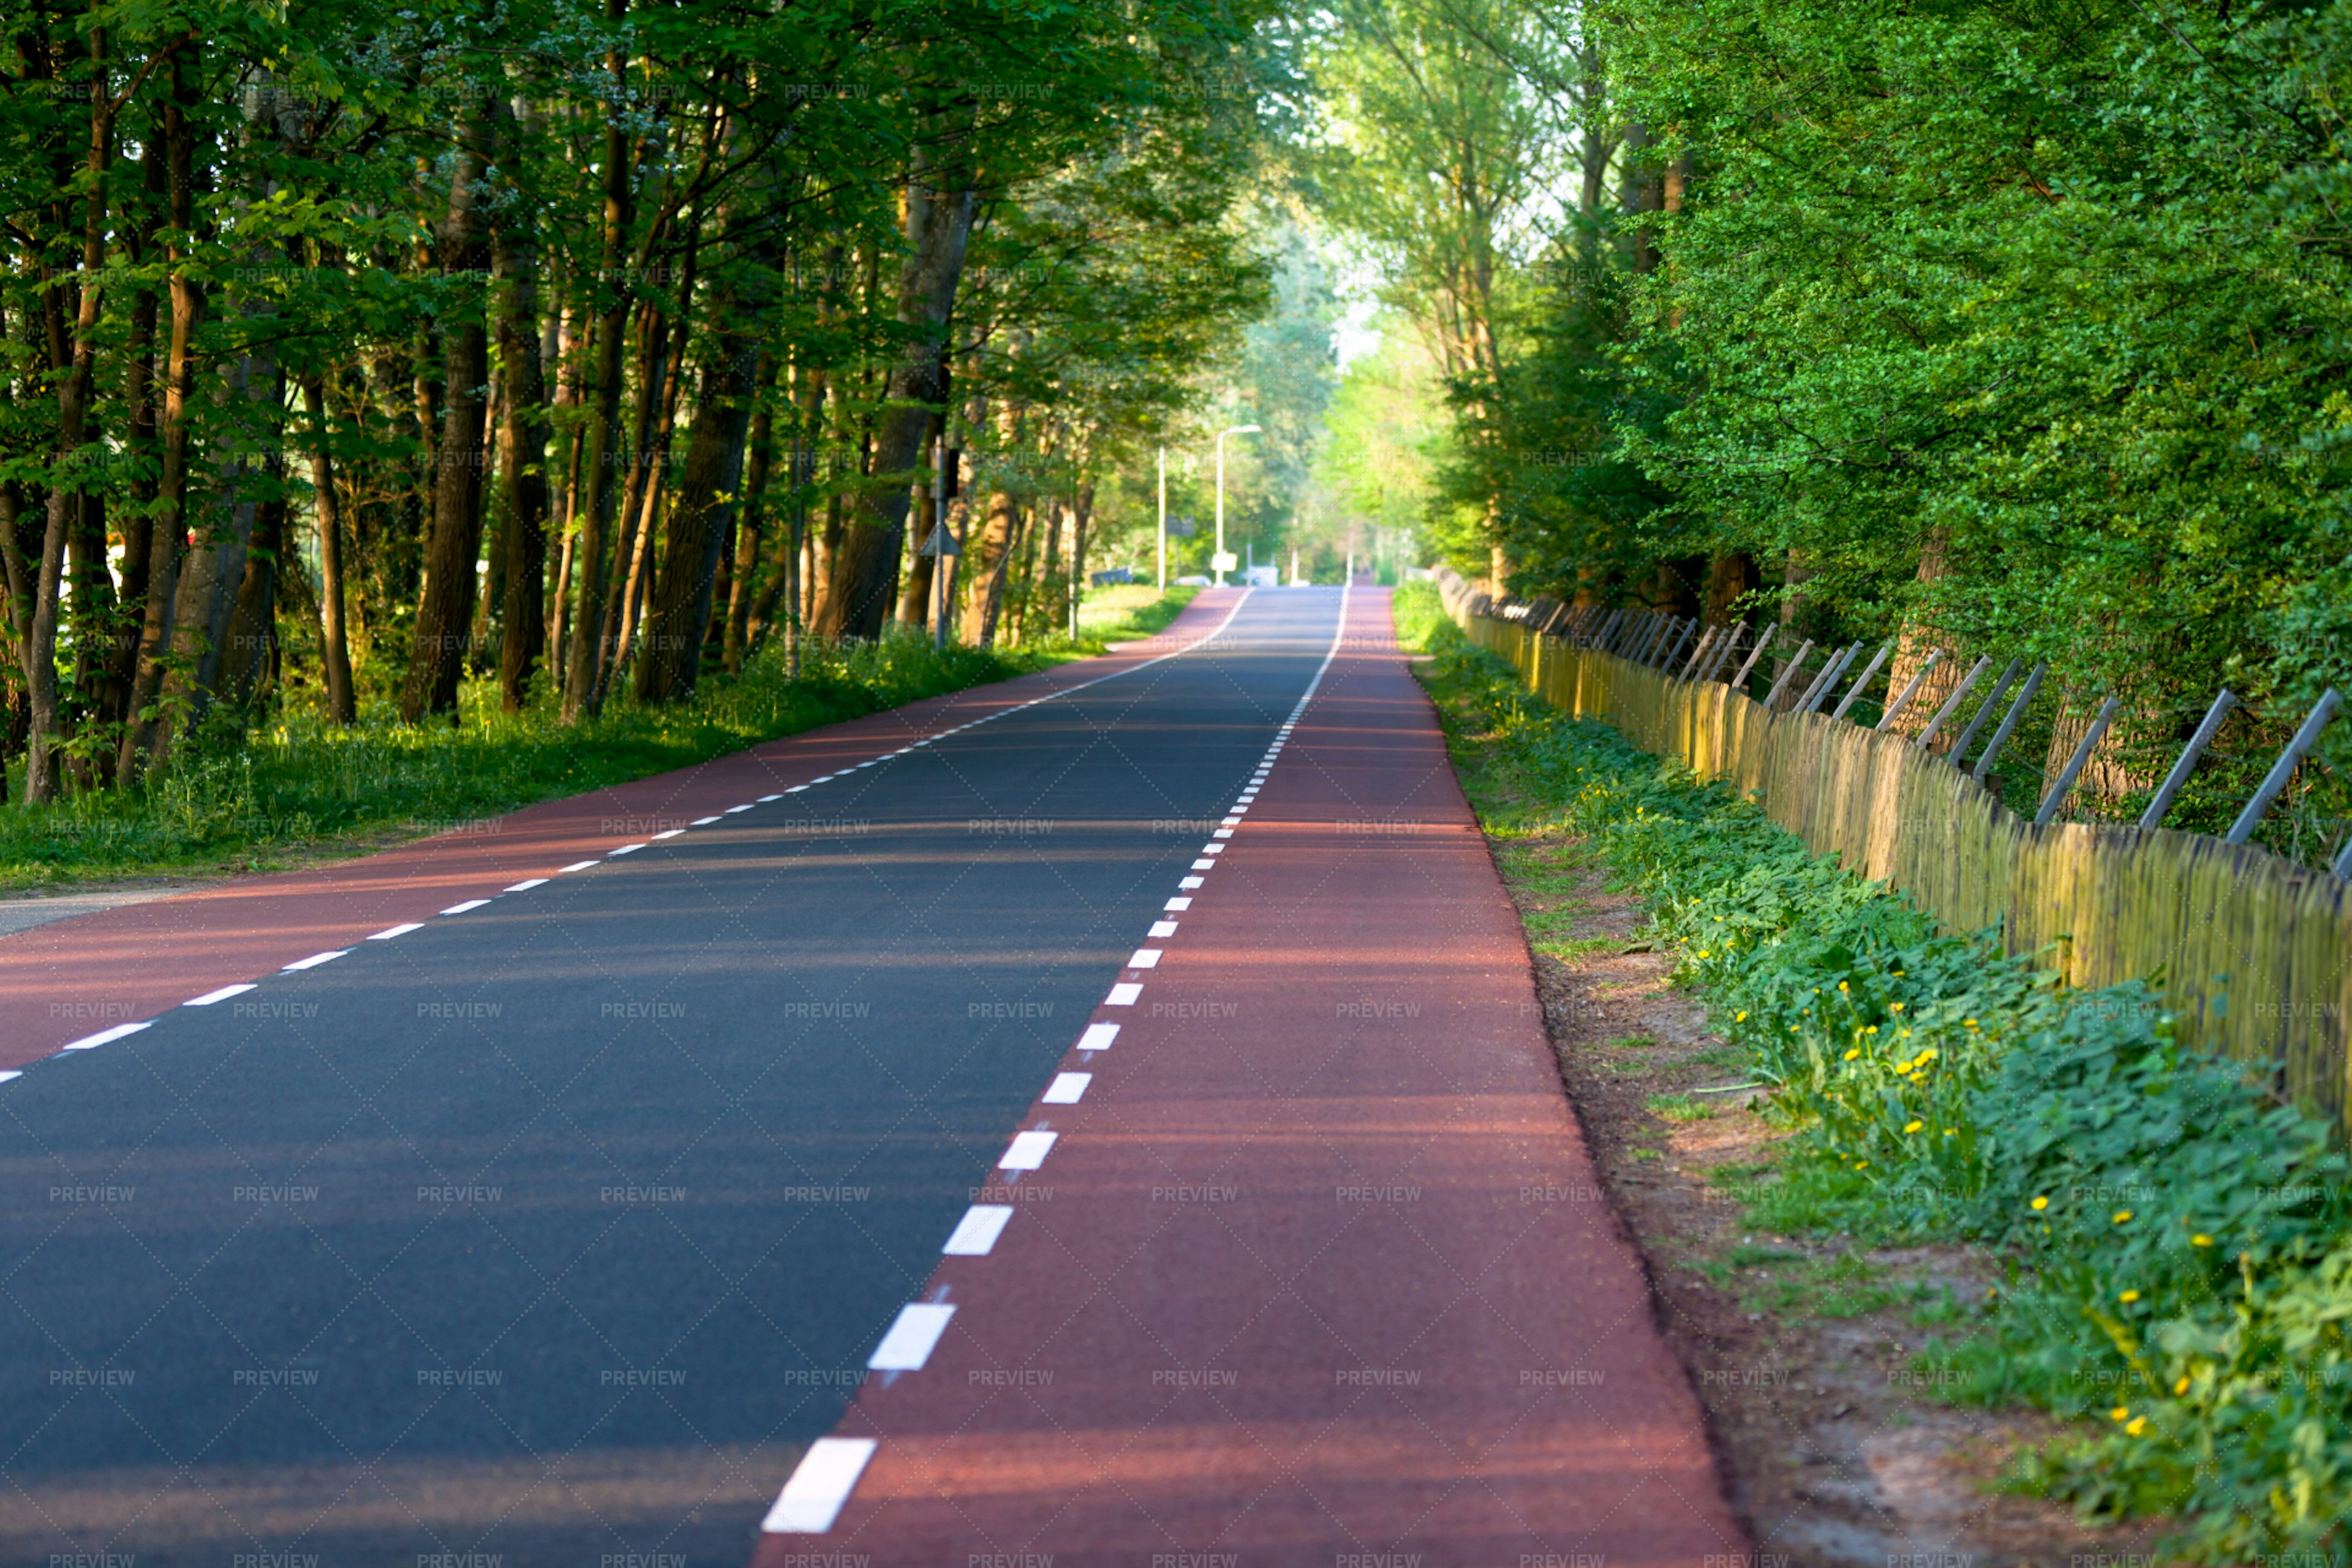 Empty Road With Bike Paths - Stock Photos | Motion Array